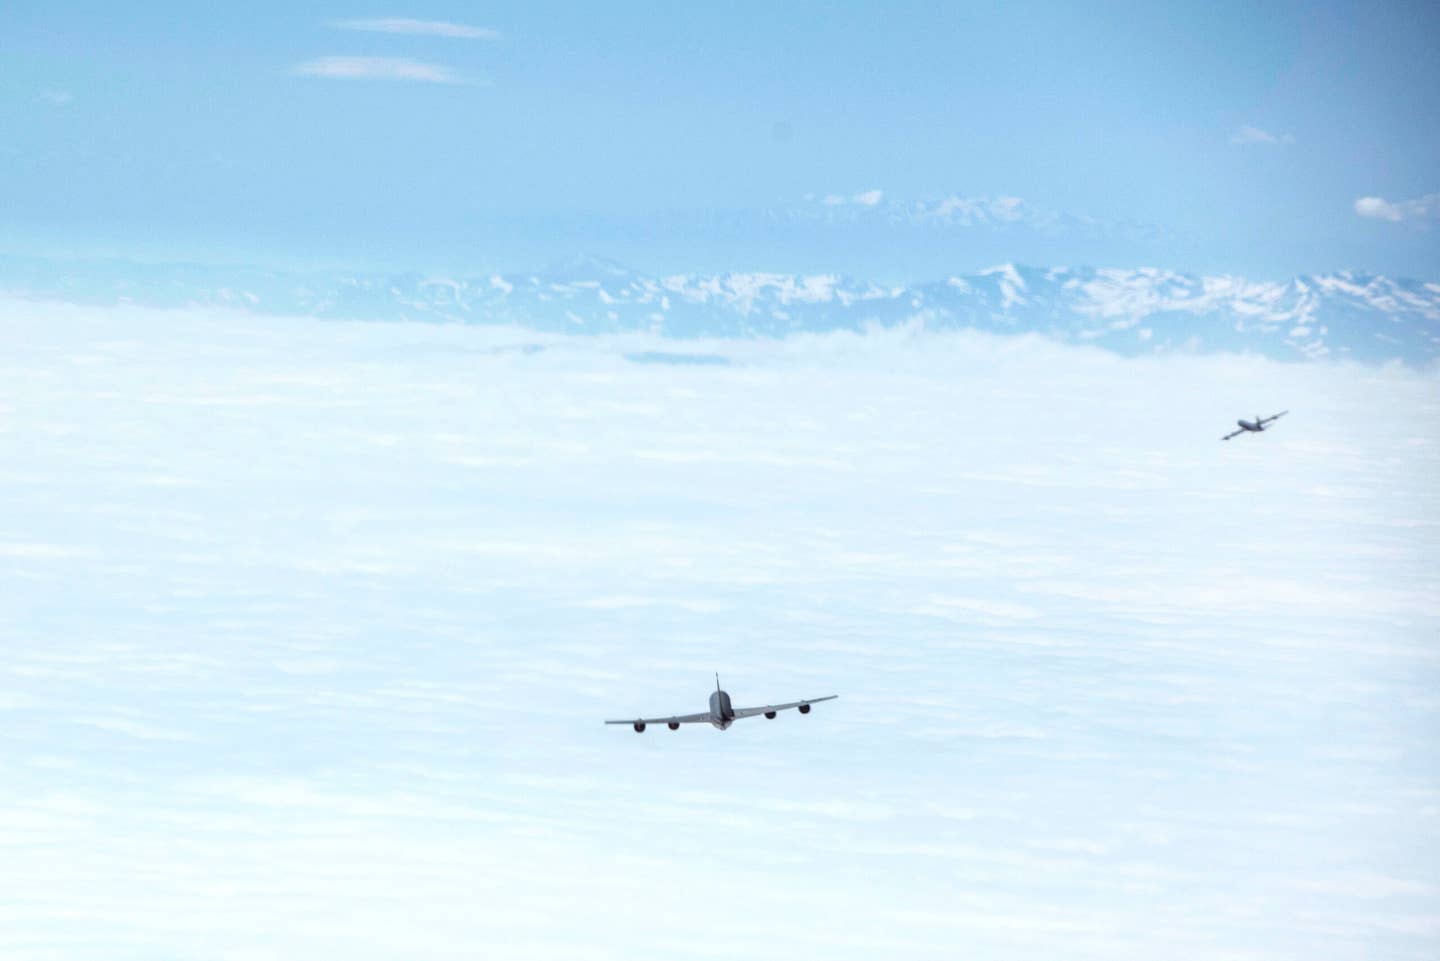 U.S. Air Force KC-135 Stratotankers fly in formation with Turkish Air Force KC-135 Stratotankers assigned to the 10th Tanker Base, Incirlik Air Base, over Turkey during a previous Bomber Task Force mission on May 29, 2020. <em>U.S. Air Force photo by Staff Sgt. Joshua Magbanua</em>